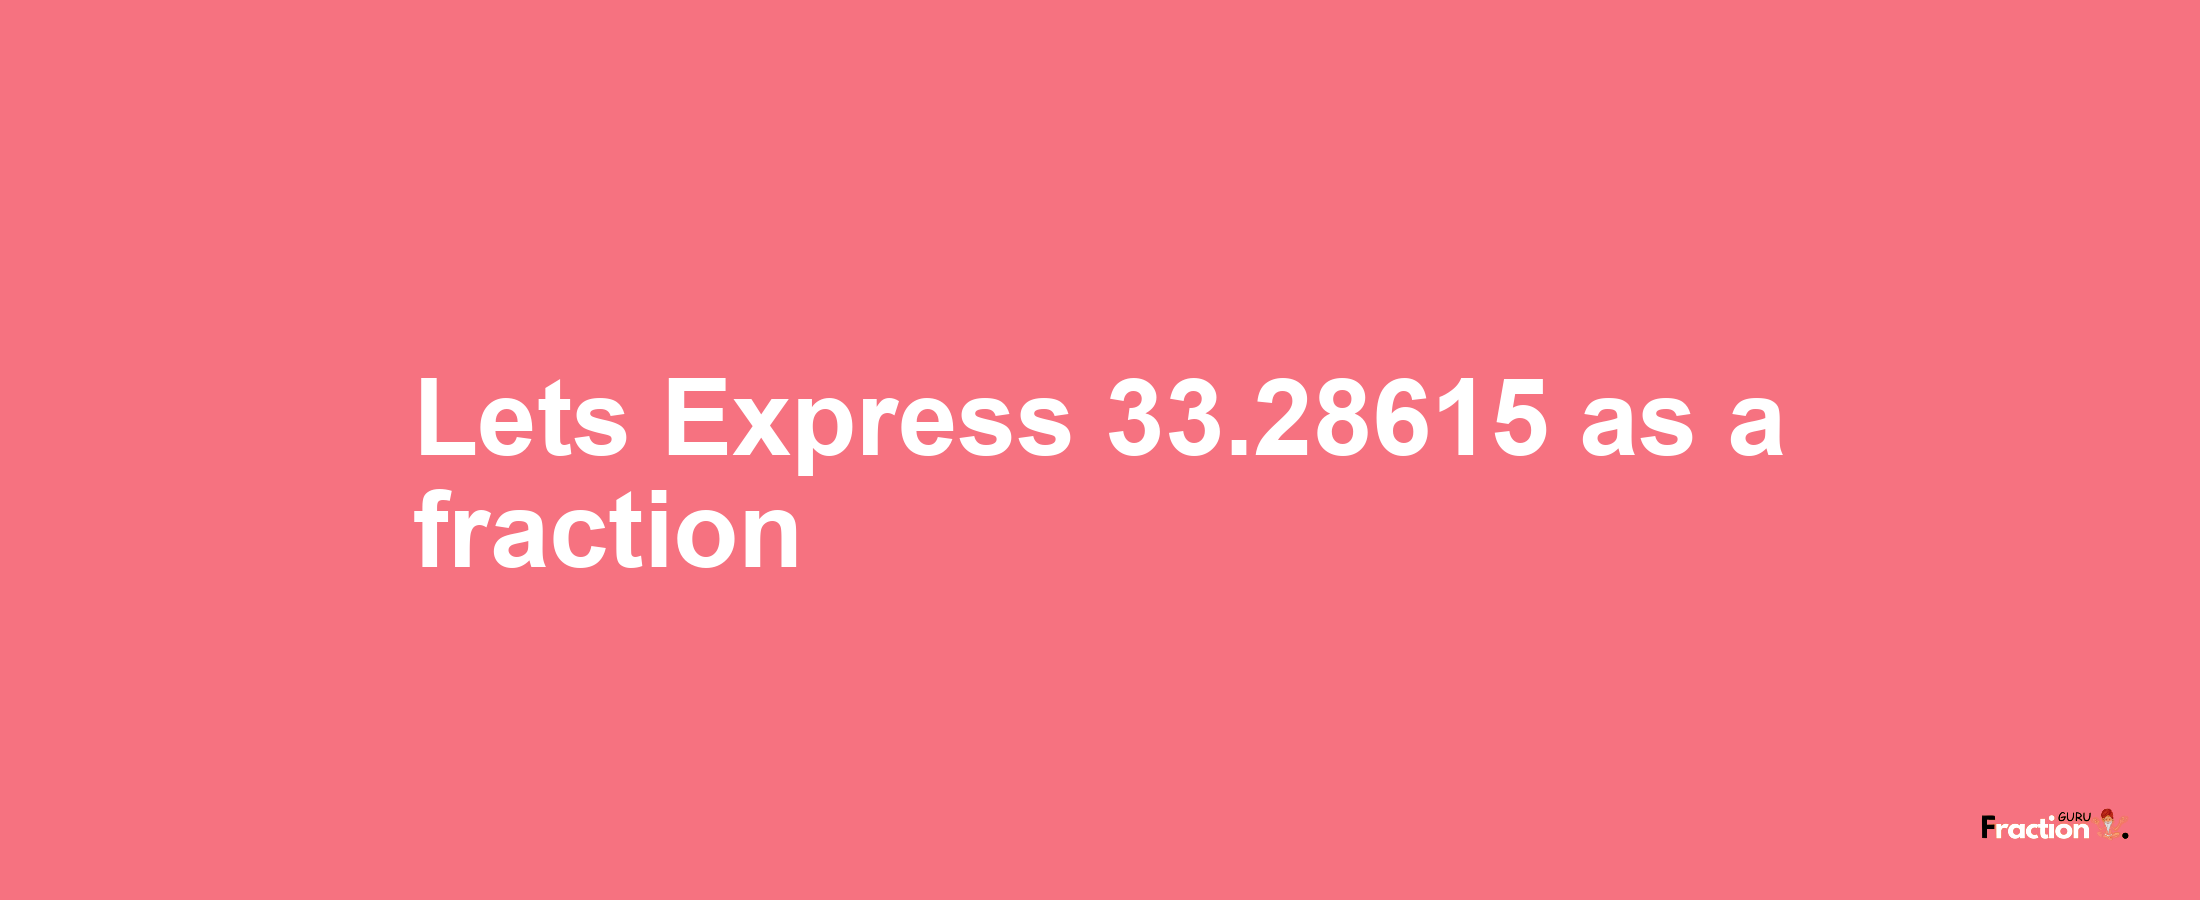 Lets Express 33.28615 as afraction